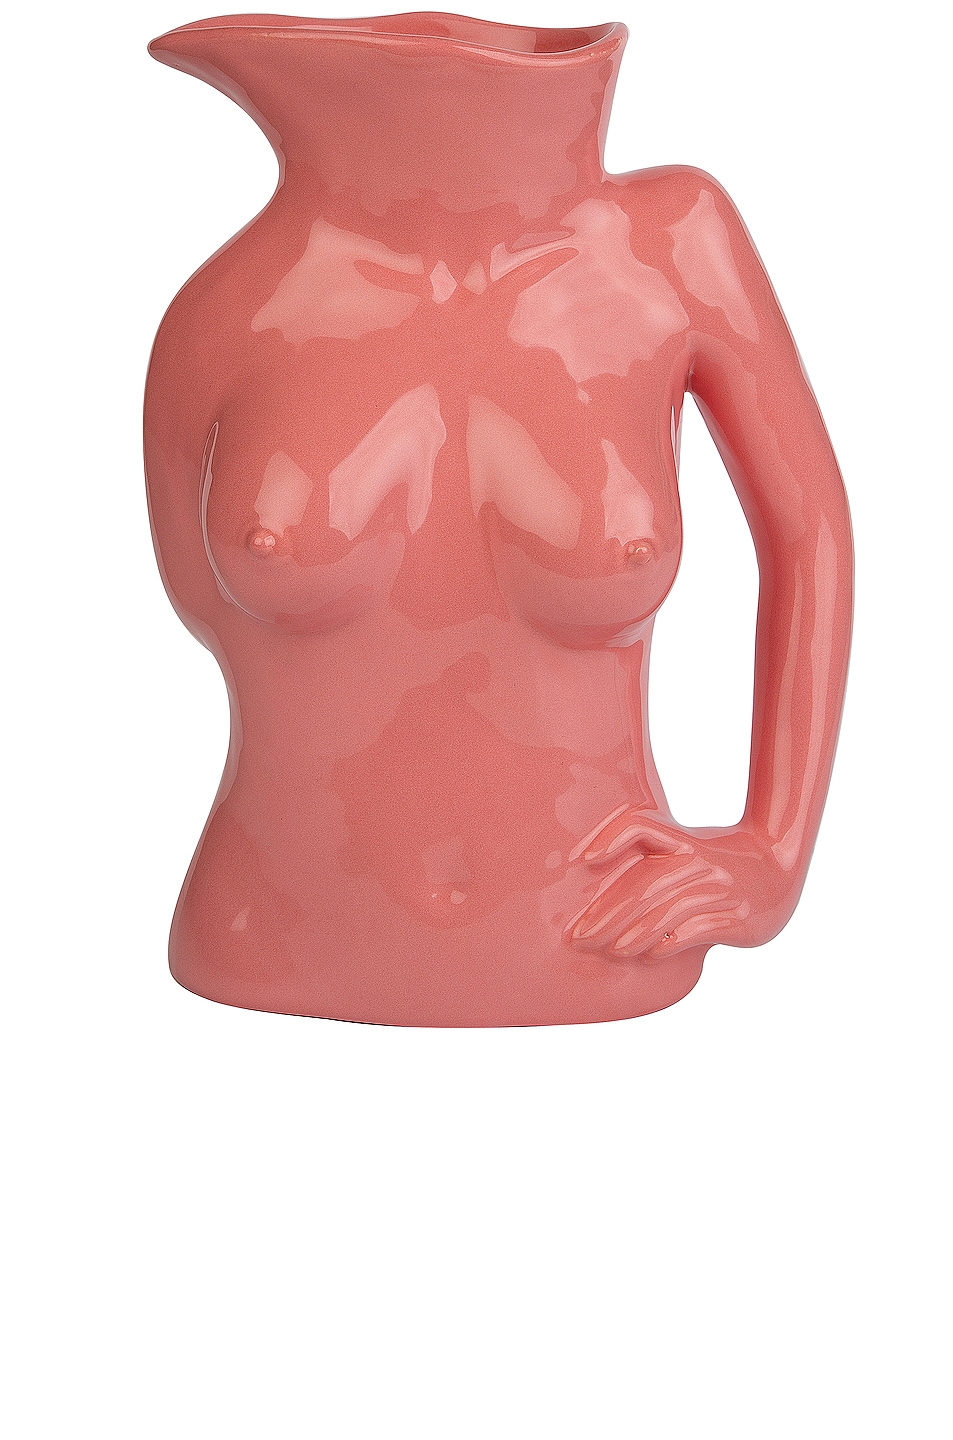 Image 1 of Anissa Kermiche Jugs Jug in Rose Pink Shiny